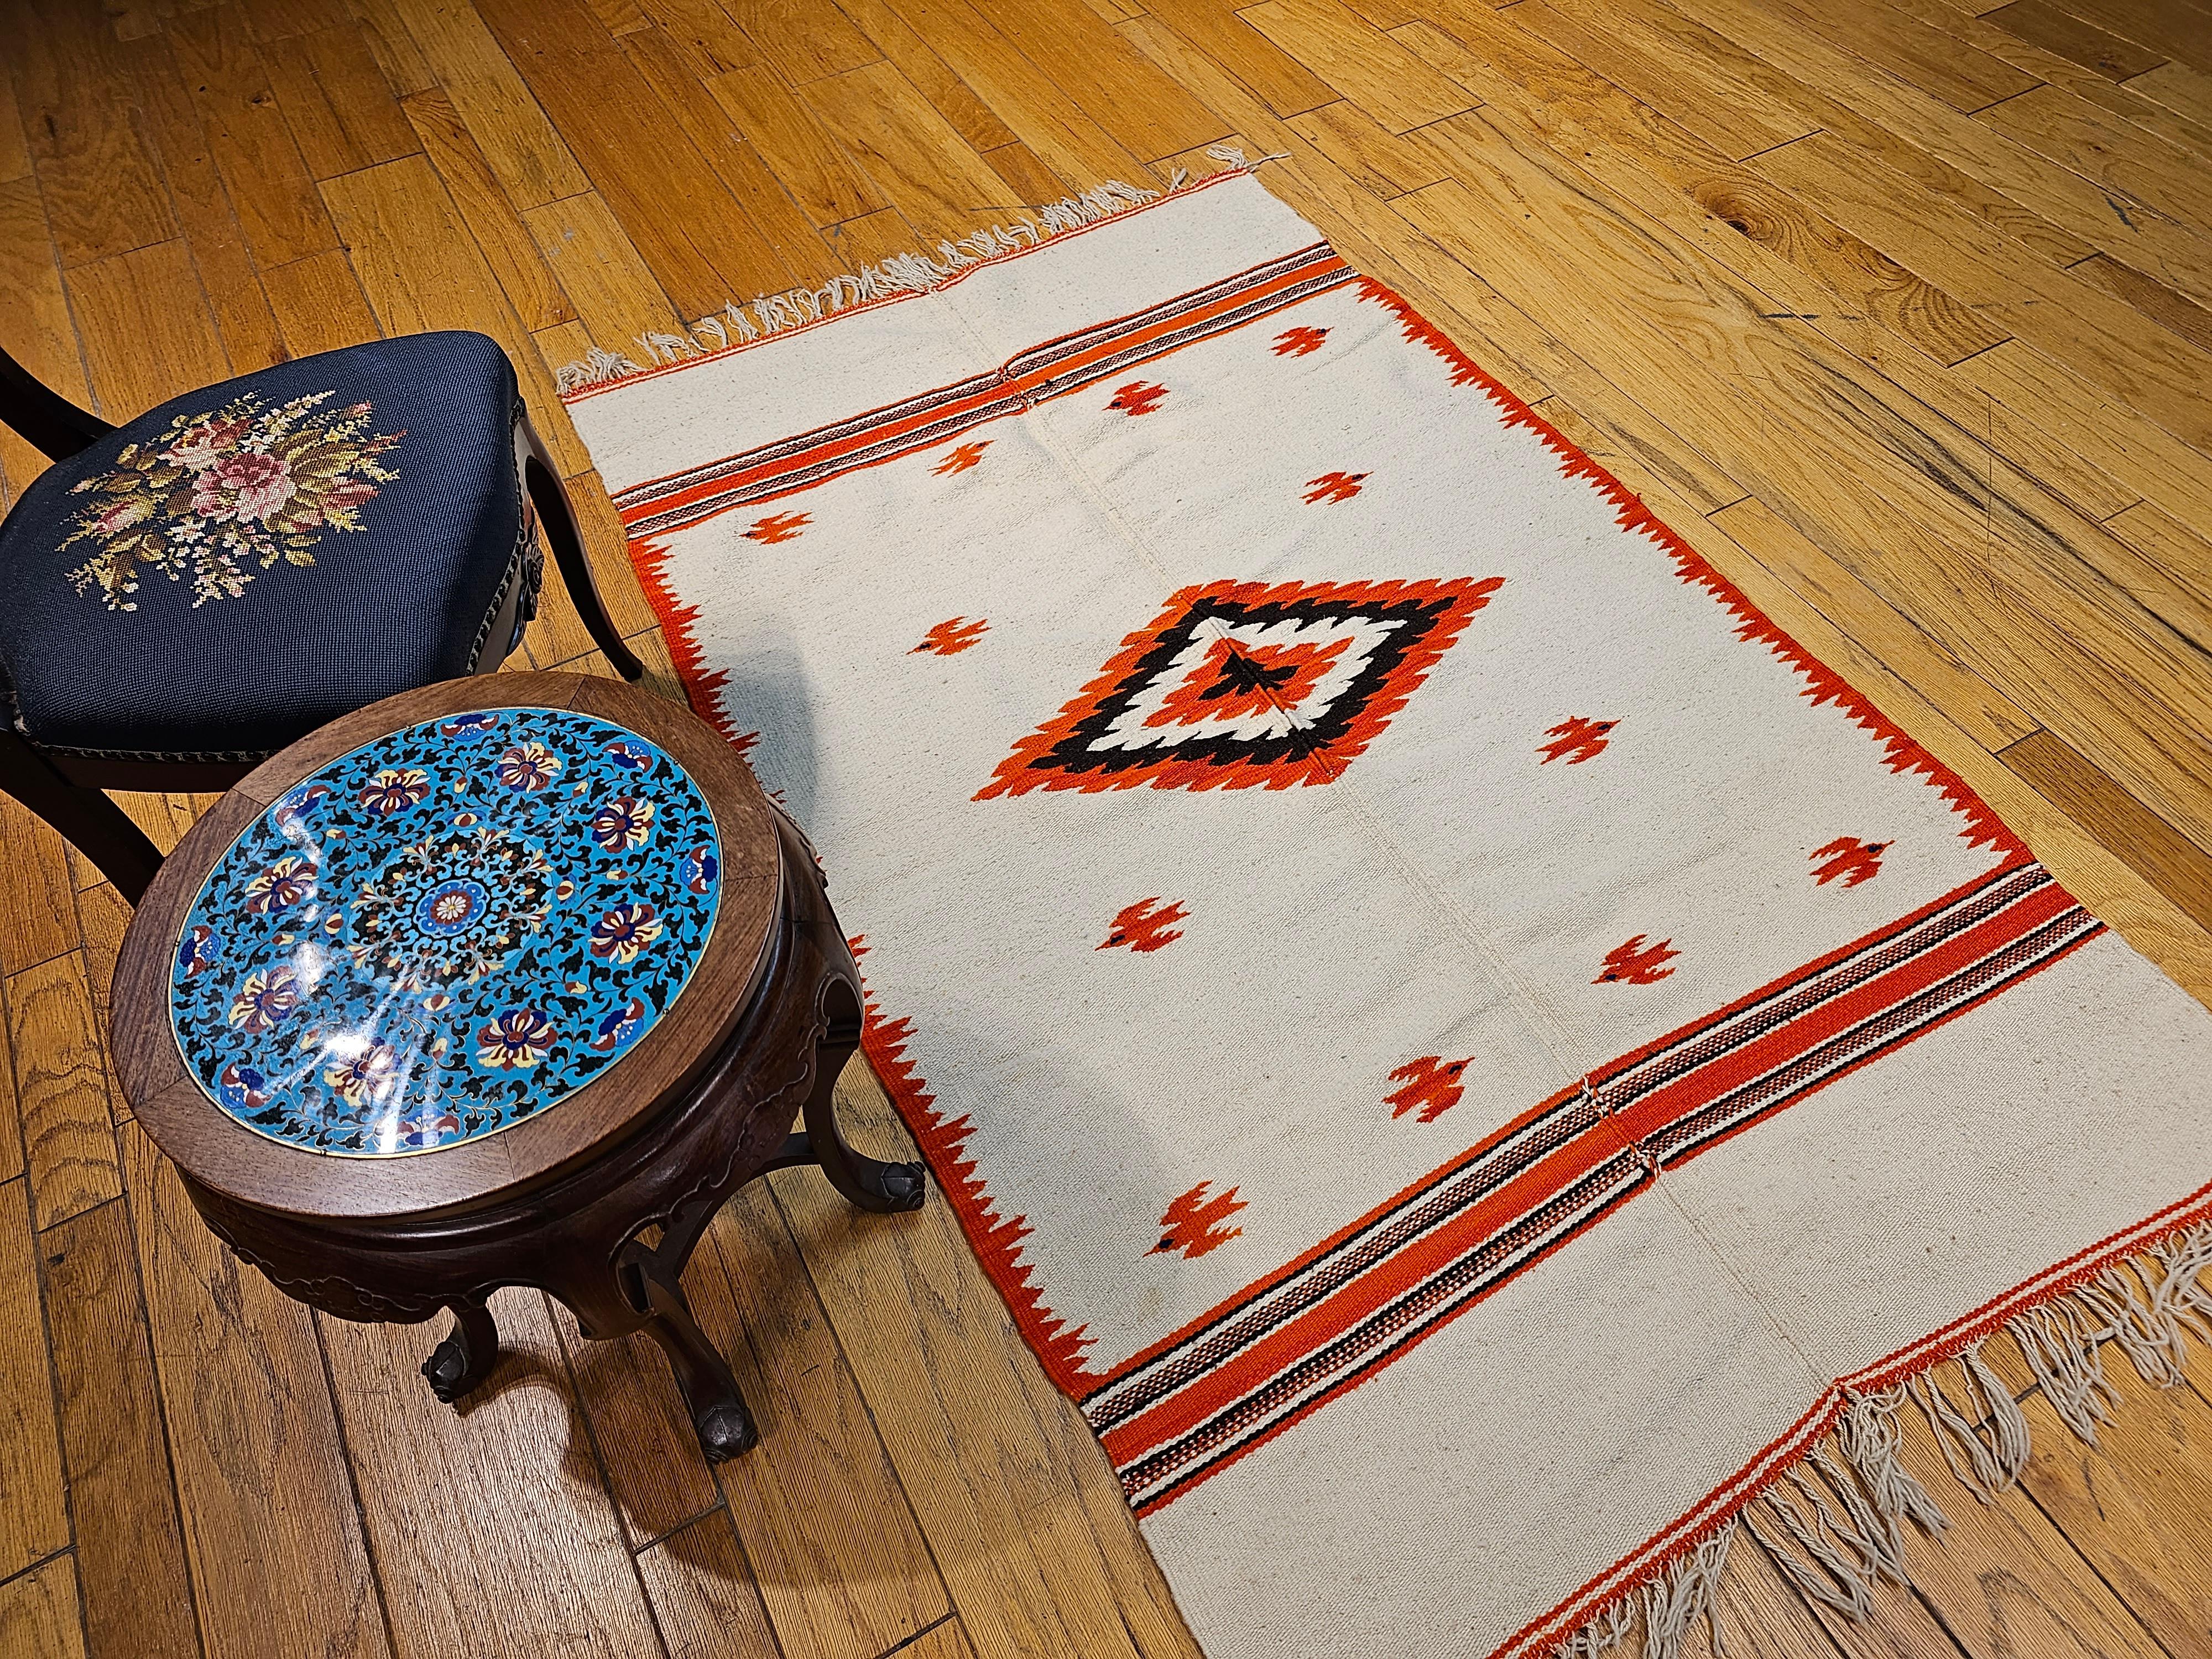 Vintage Mexican Serape Saltillo Kilim Rug with Mythical Bird Designs For Sale 5